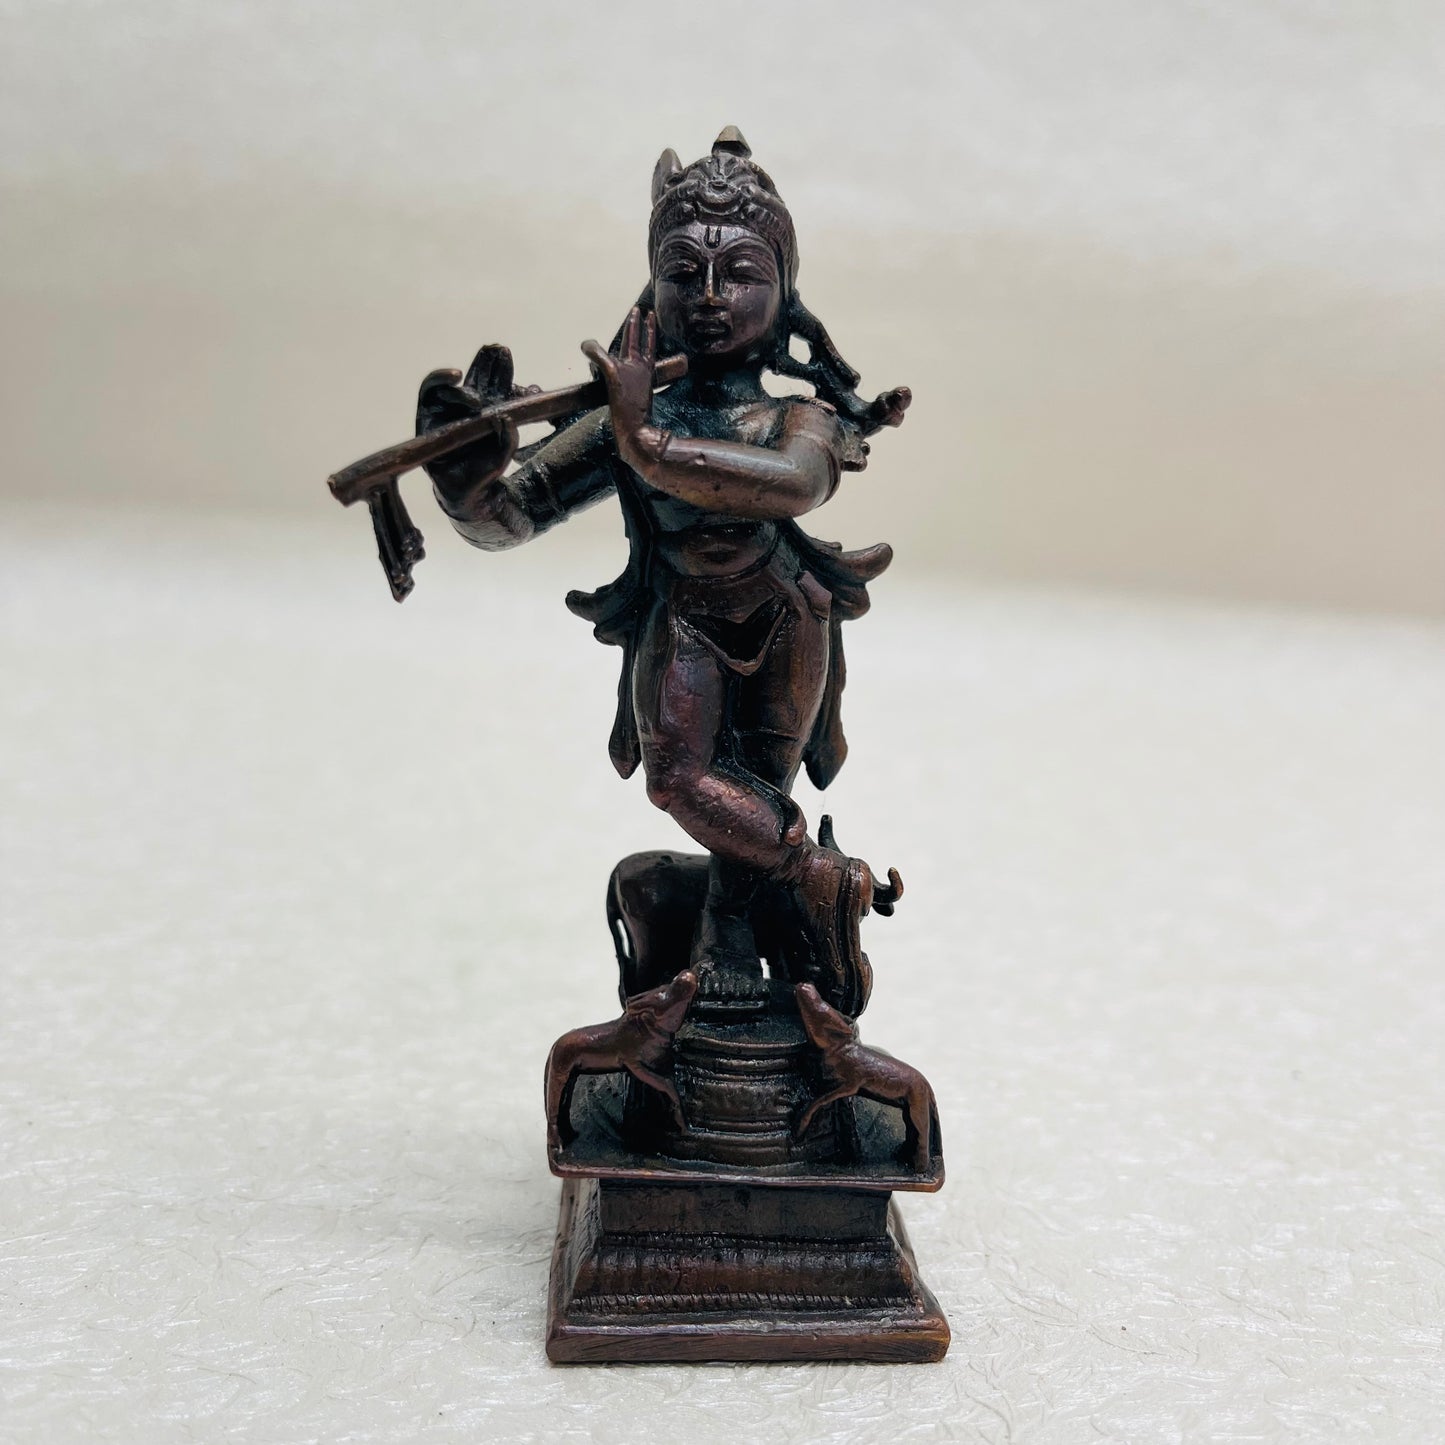 Miniature Krishna With Cow playing Flute casted in copper